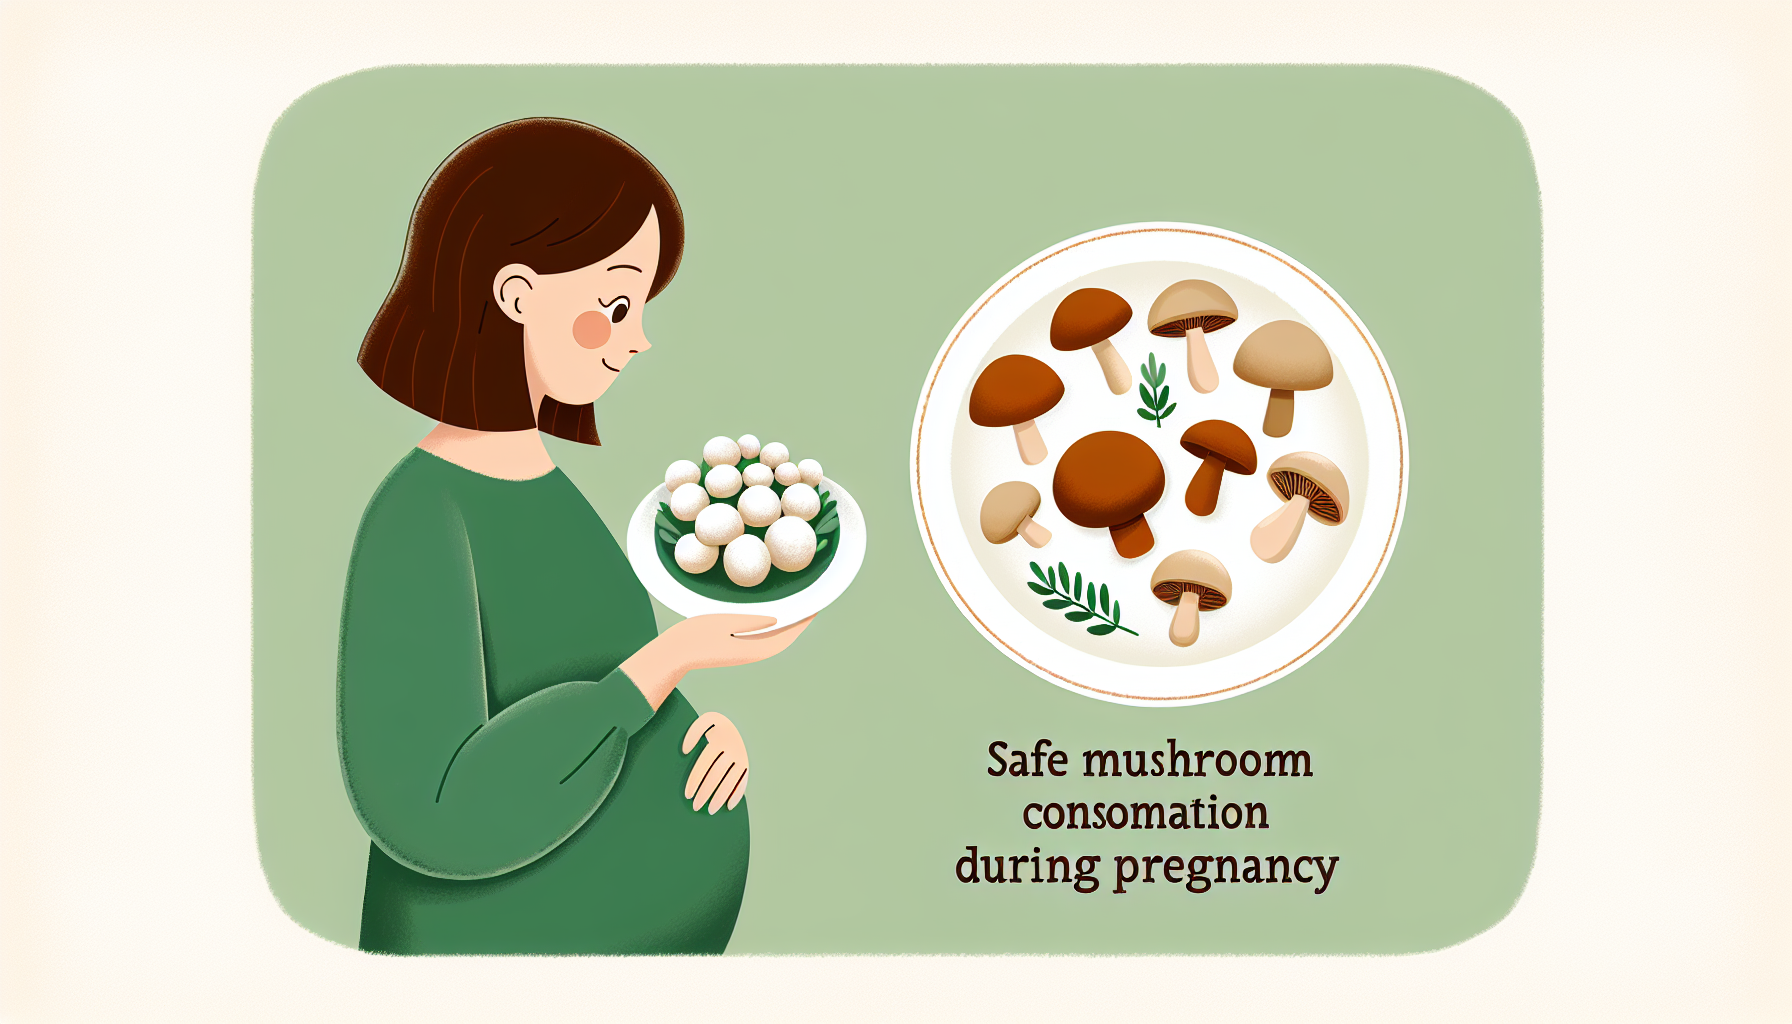 Can You Eat Mushrooms While Pregnant?